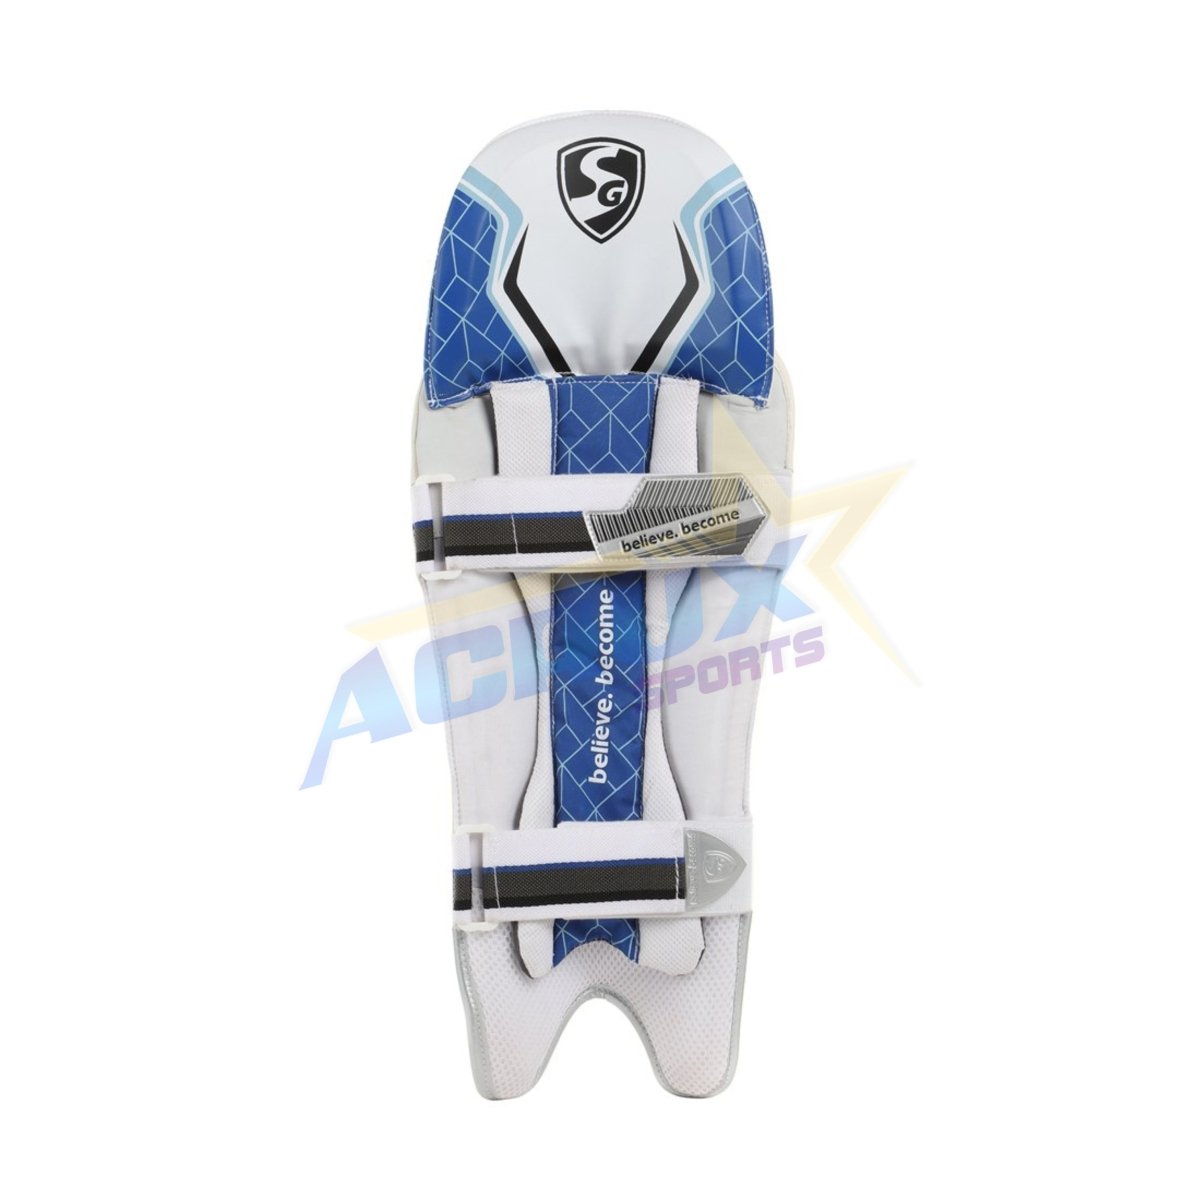 SG Megalite Cricket Wicket Keeping Pads.